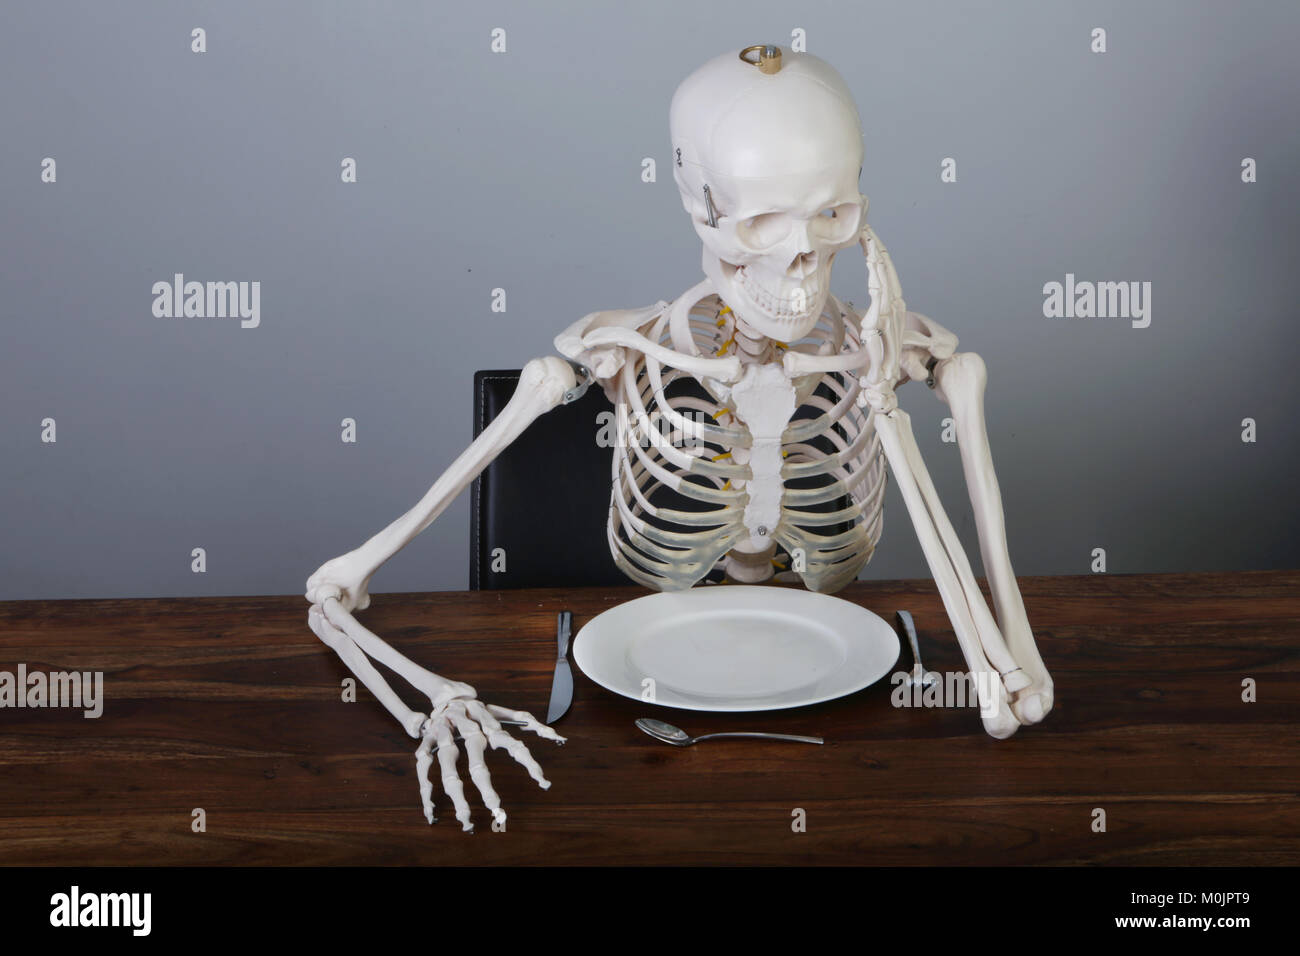 Skeleton with supported head sitting at table, Germany Stock Photo